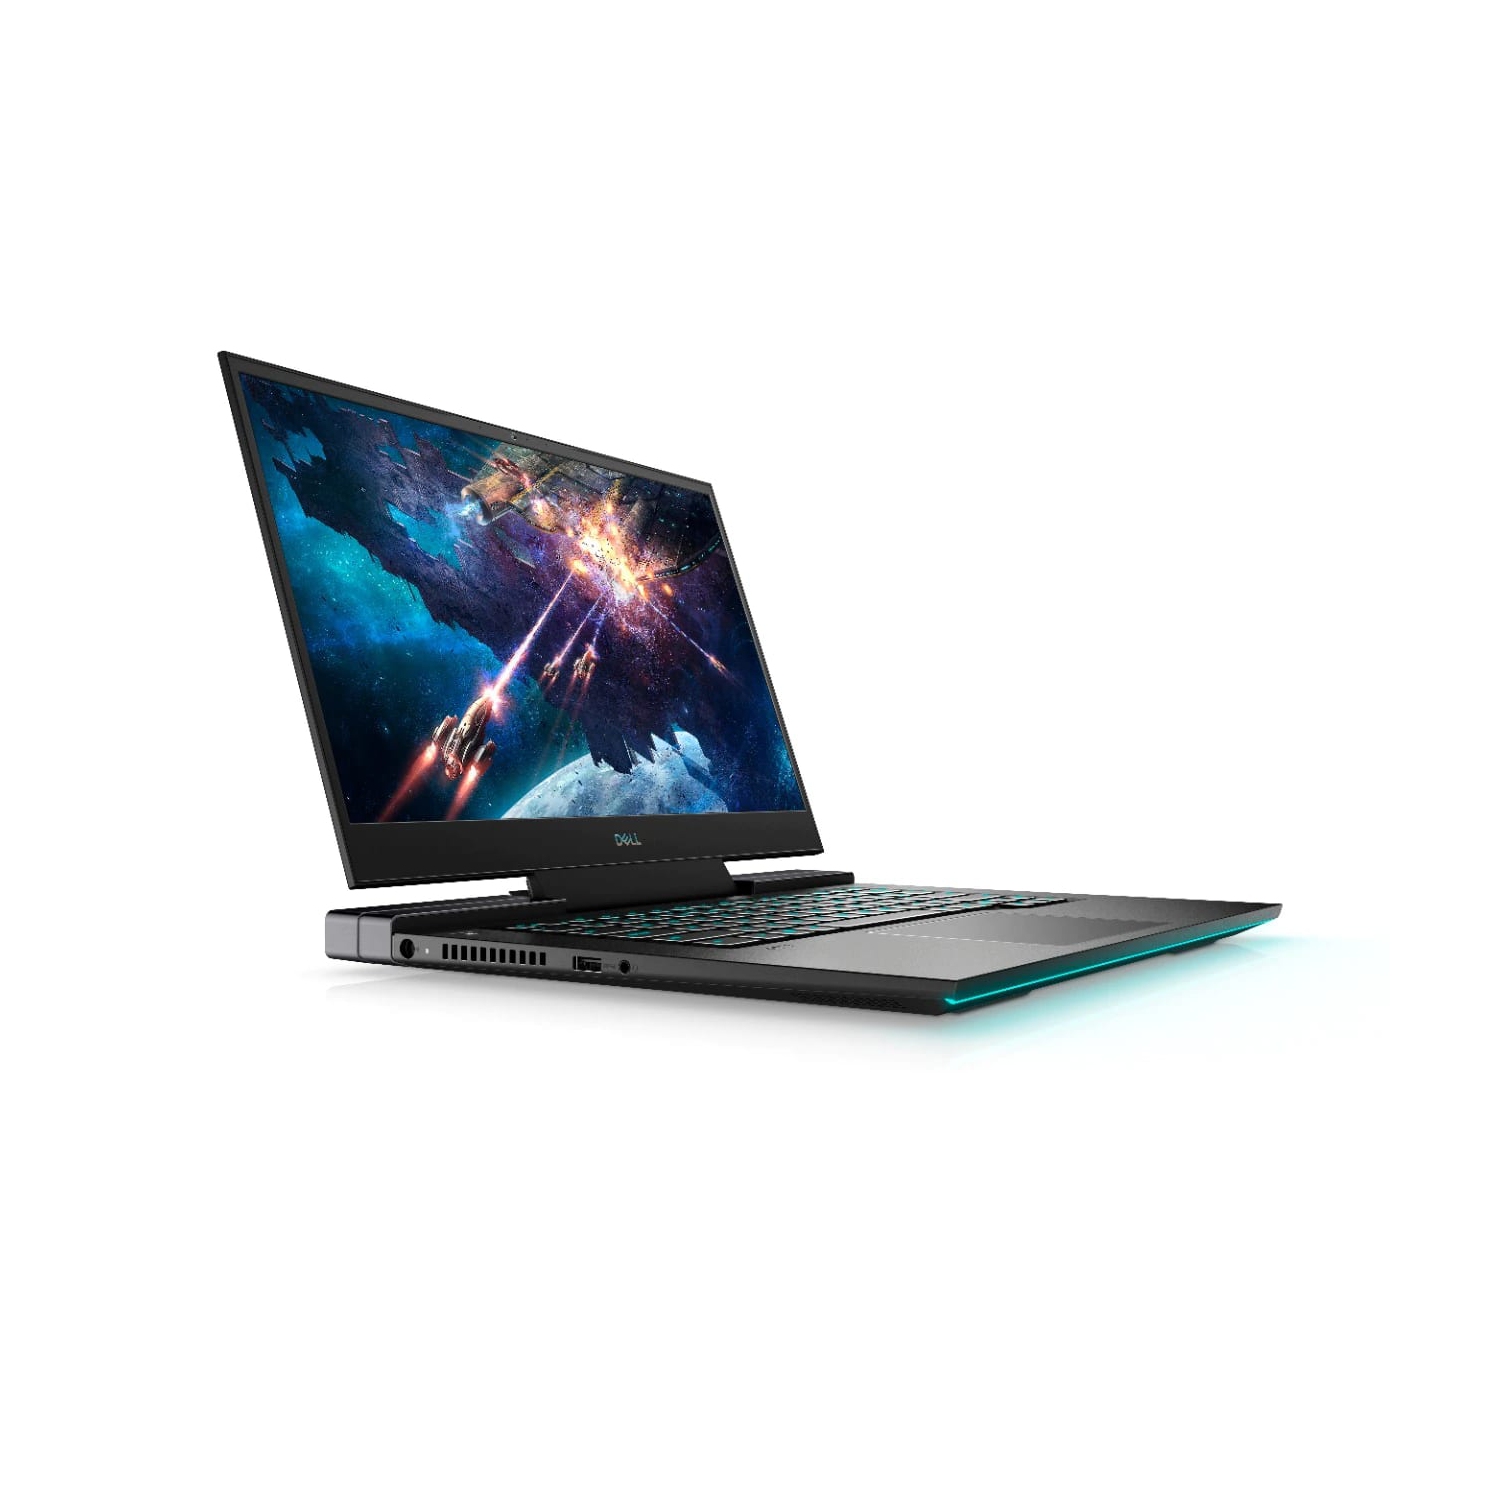 Refurbished (Excellent) - Dell G7 15 7500 Gaming Laptop (2020) | 15.6" 4K | Core i7 - 1TB SSD - 32GB RAM - RTX 2070 | 6 Cores @ 5 GHz - 10th Gen CPU Certified Refurbished